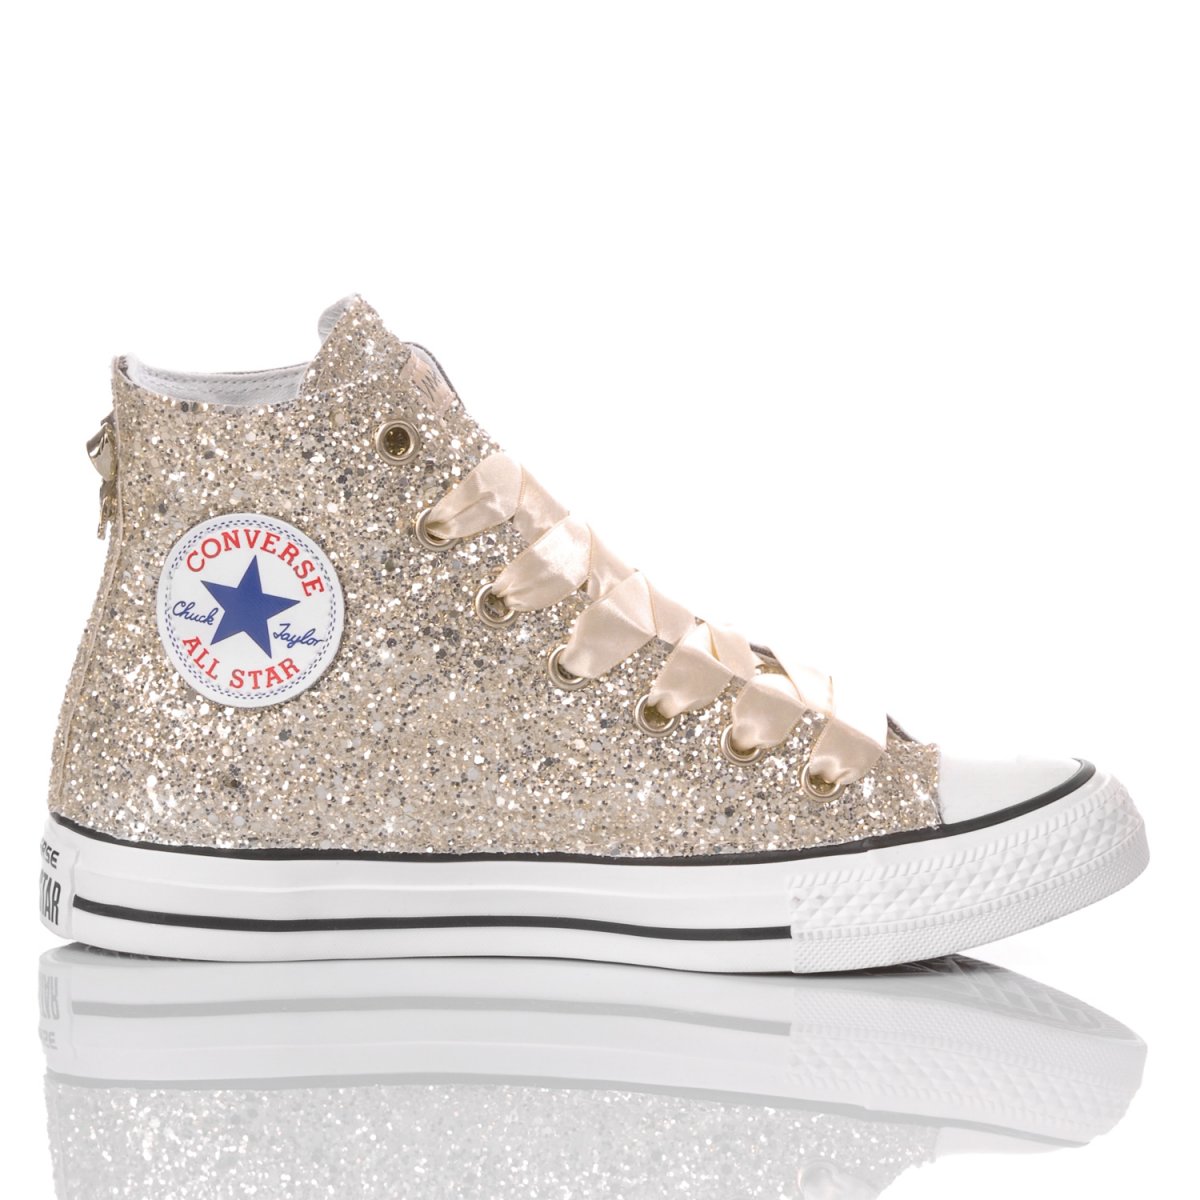 champagne converse shoes